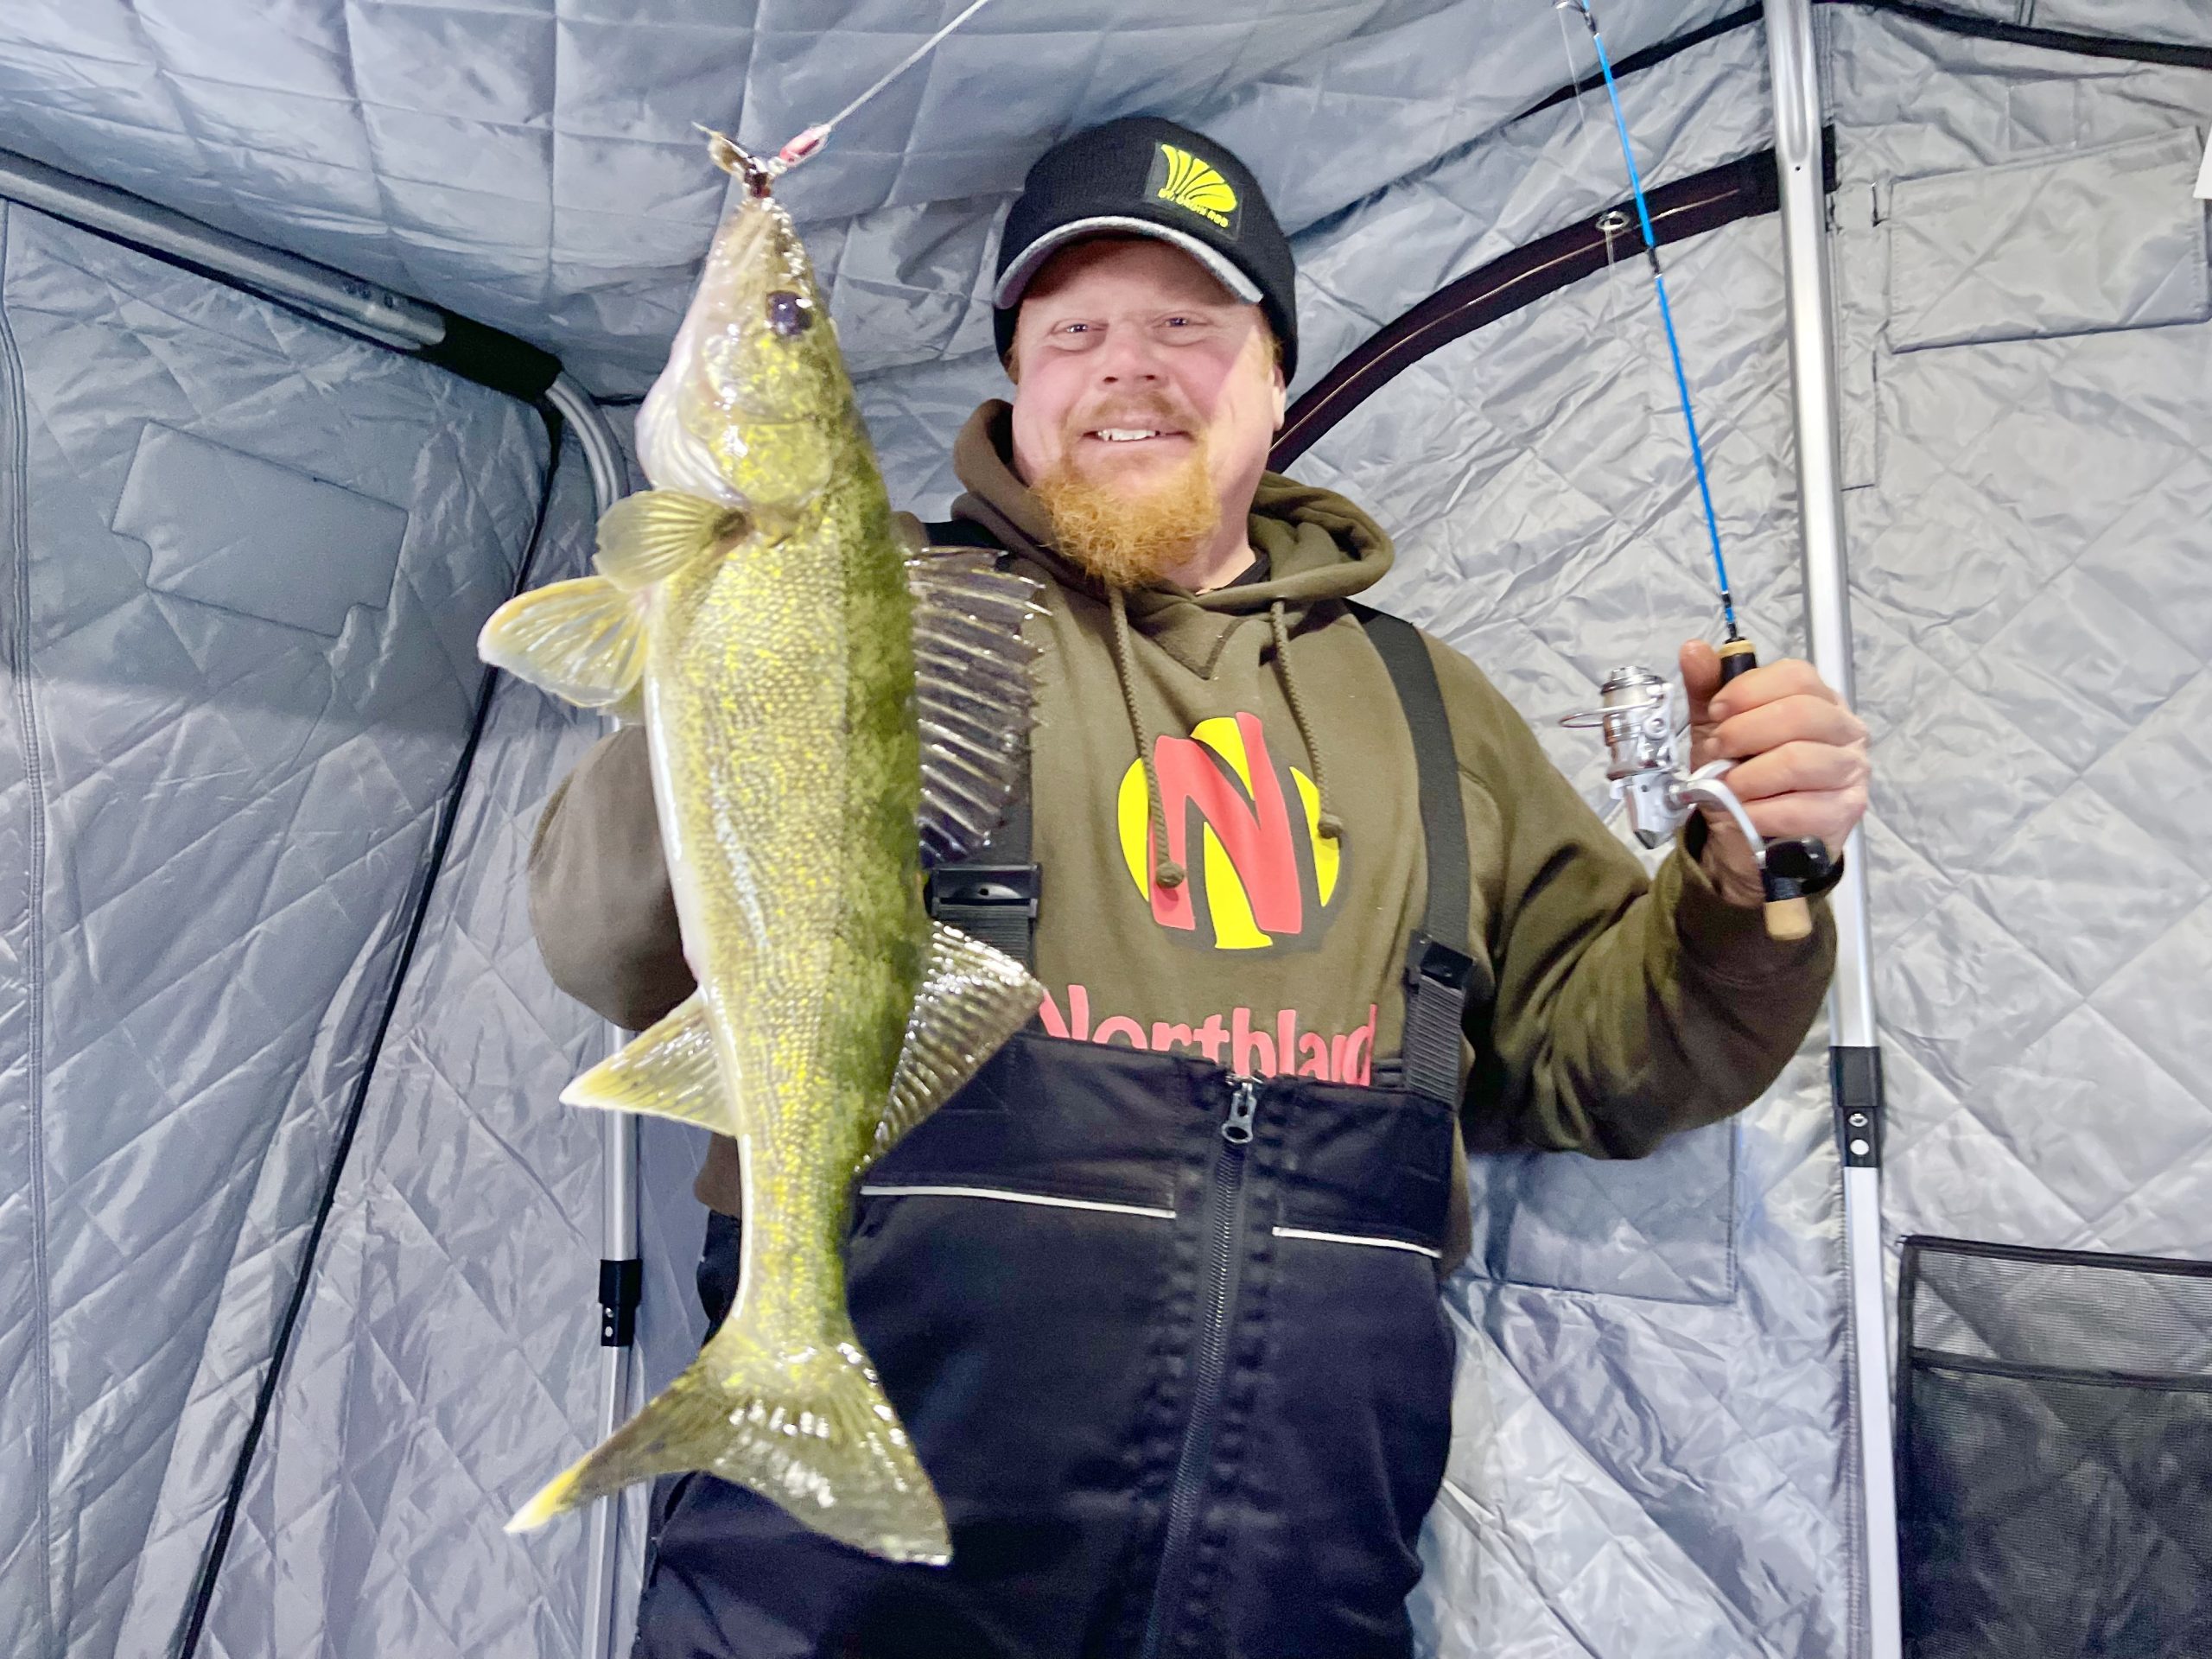 Special Issue: Early-ice baits and gear! (part 2) – Target Walleye